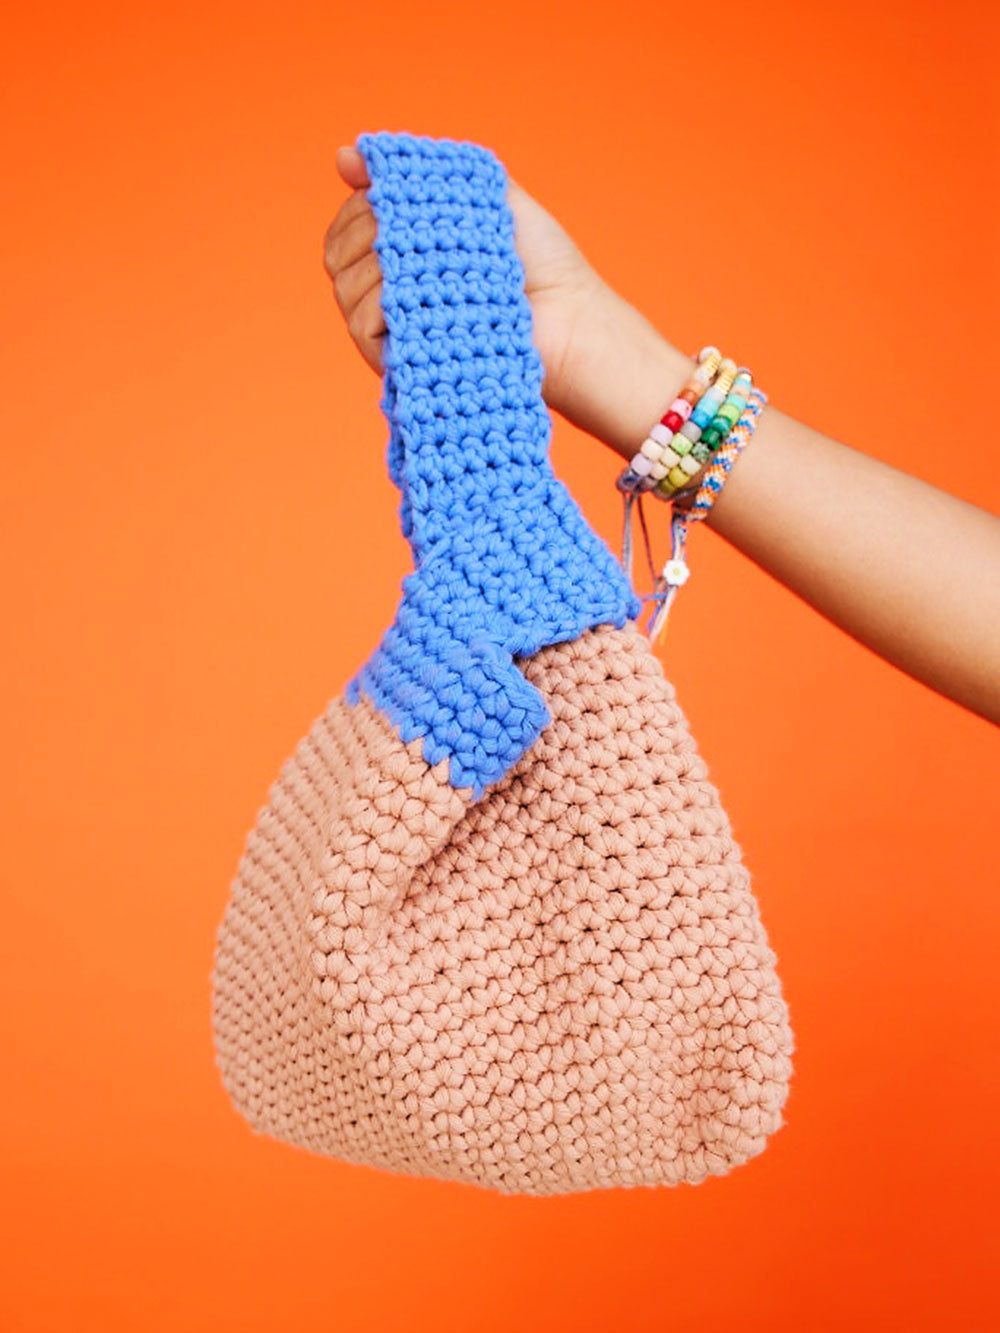 Crochet knot bag kit from Cardigang